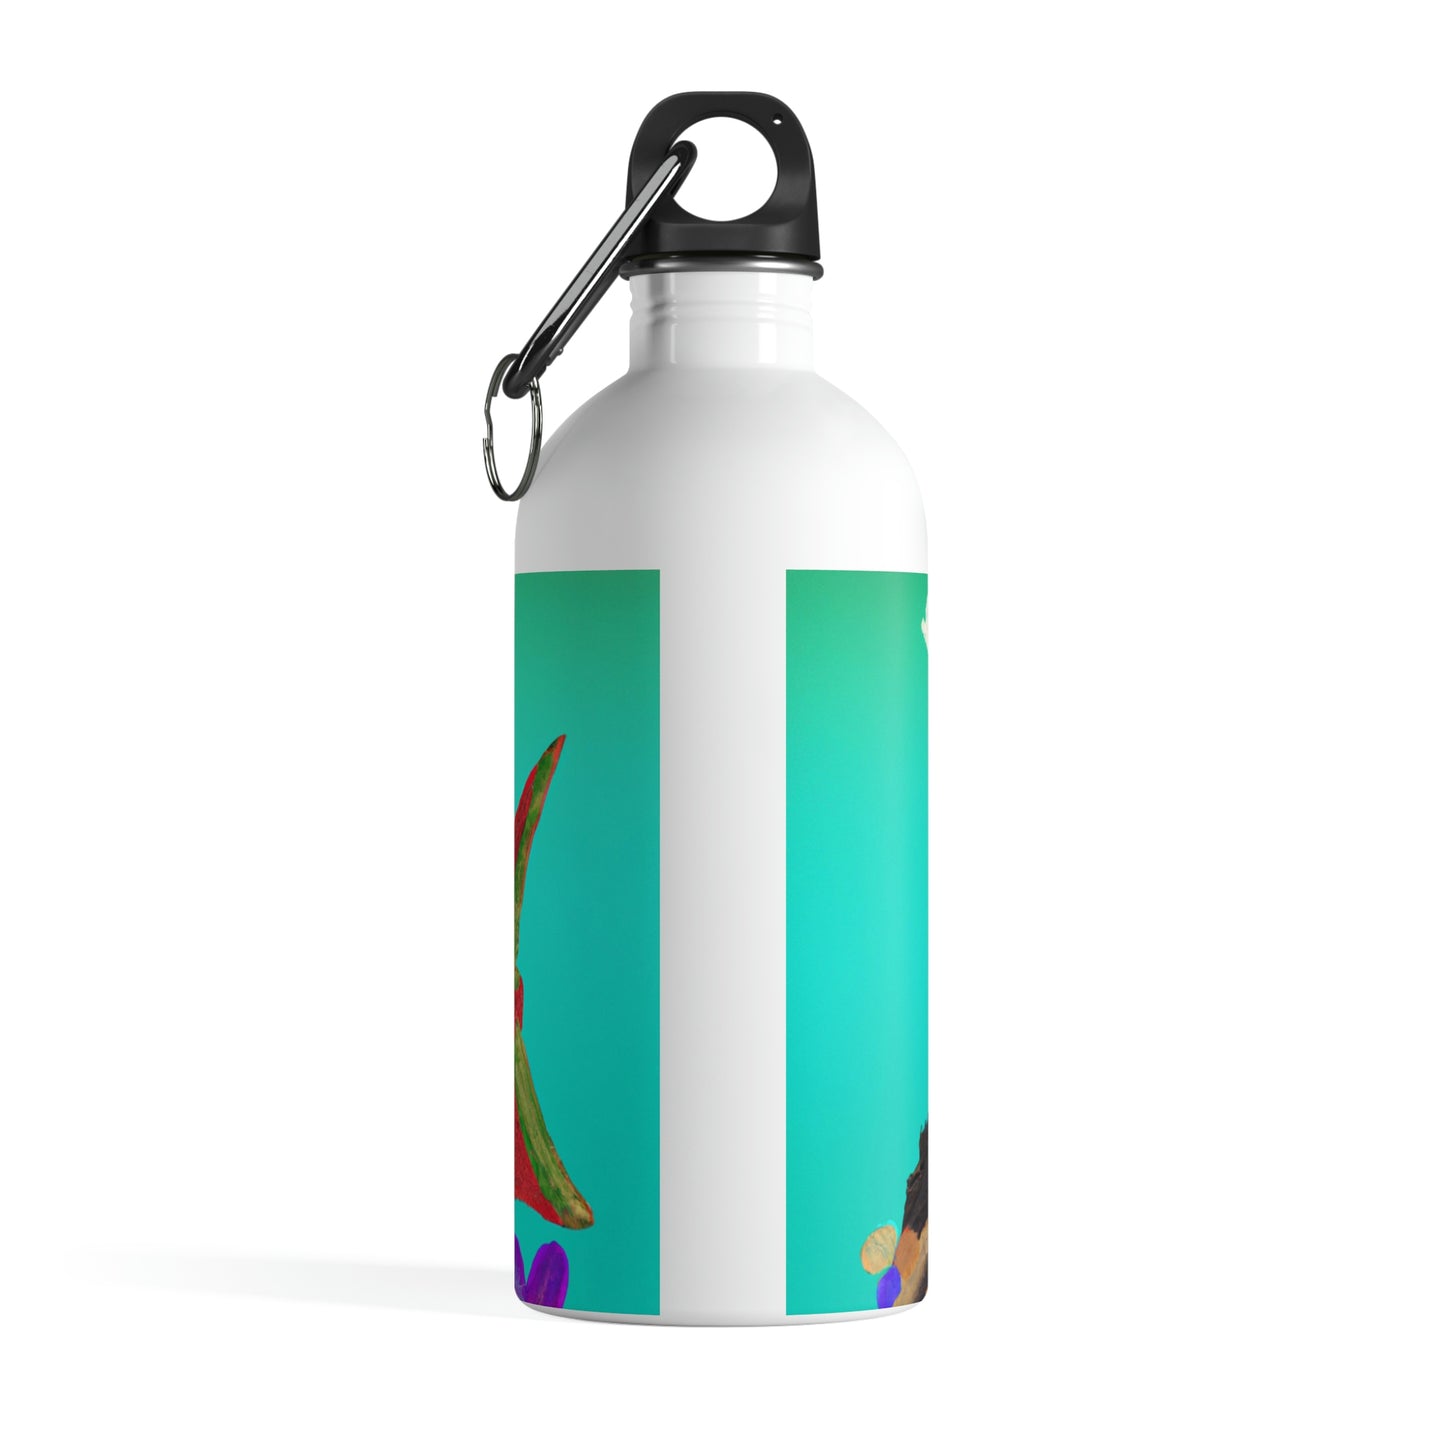 The Mysterious Flying Fish and Its Enigmatic Secret - The Alien Stainless Steel Water Bottle